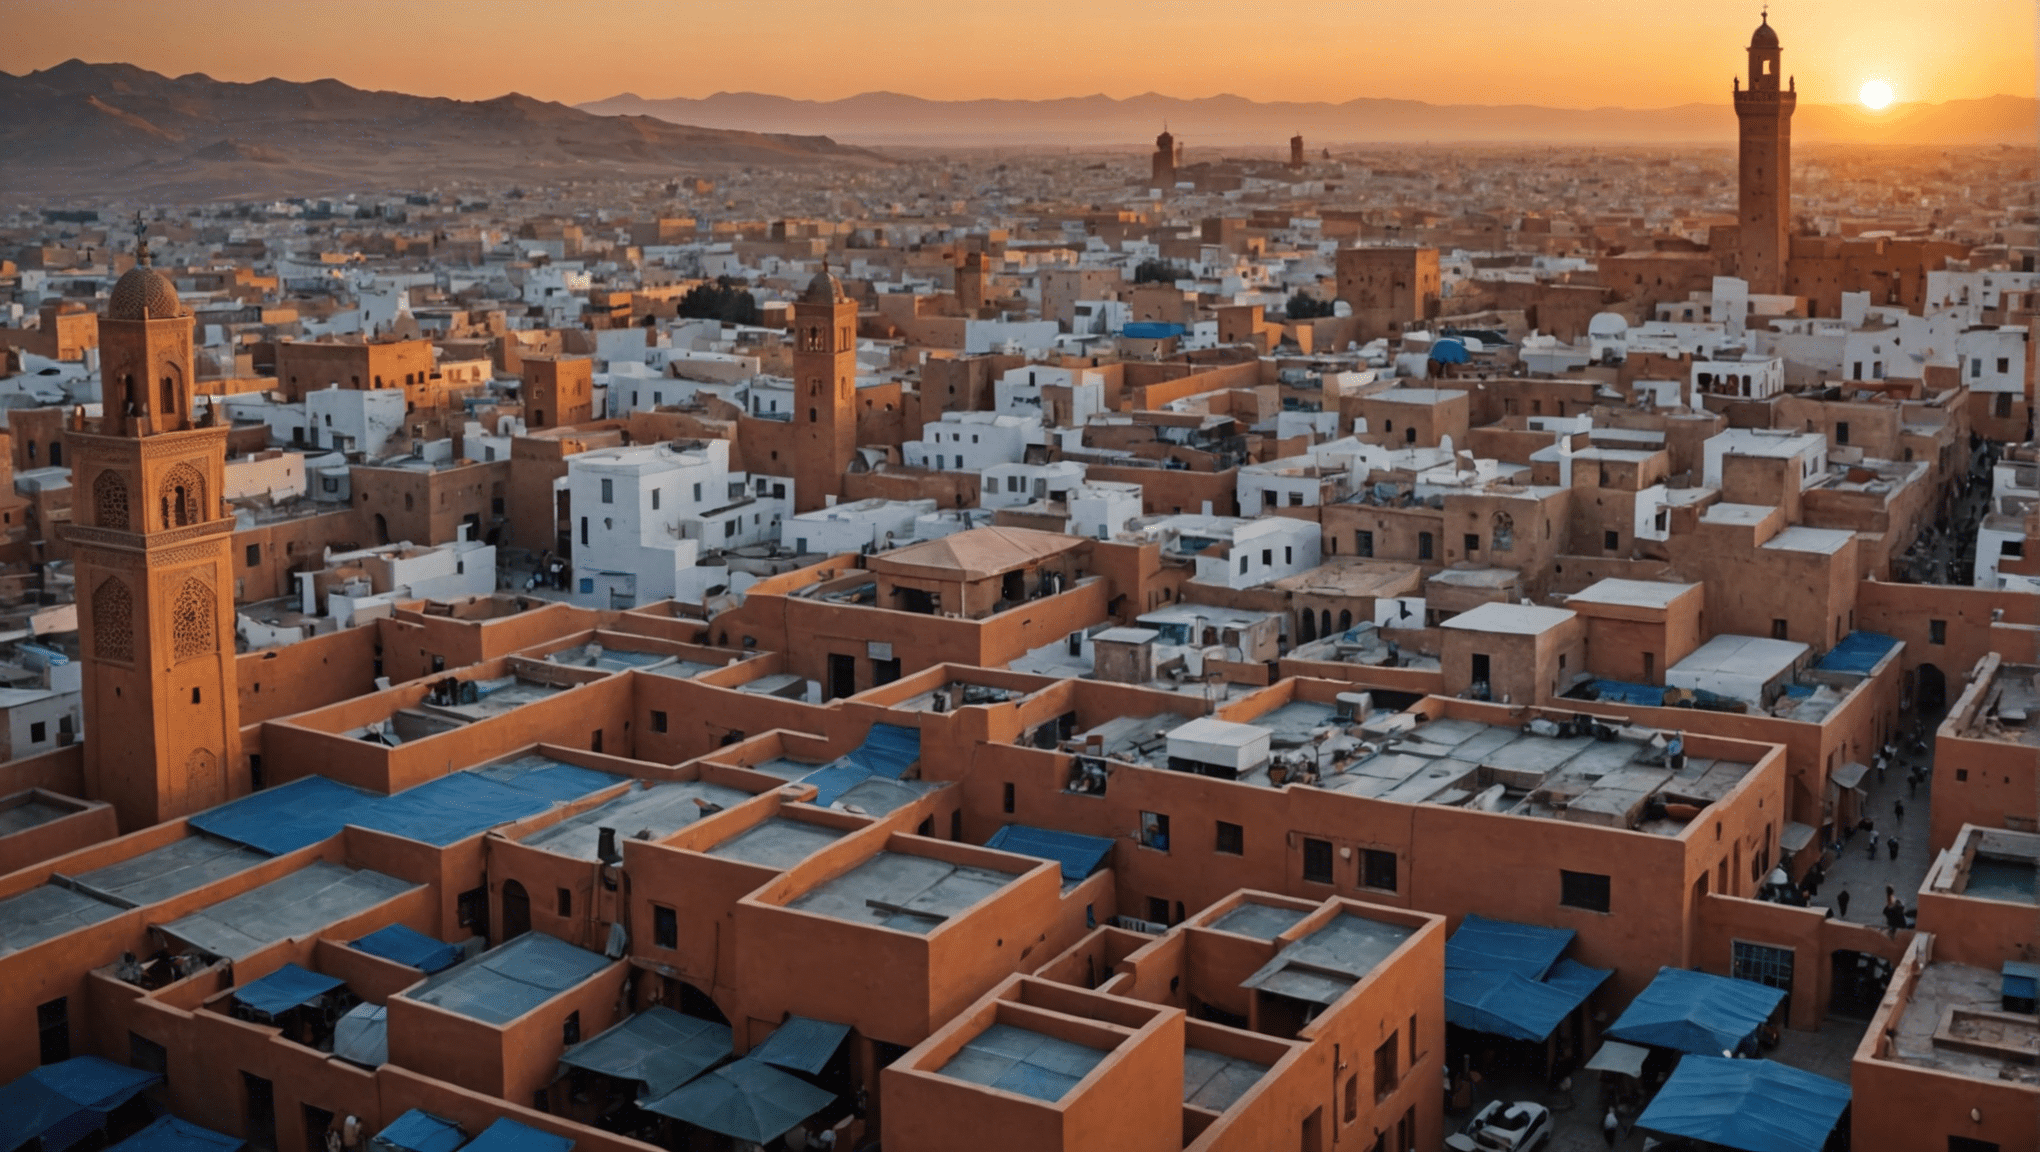 explore the allure of morocco's film industry and the allure of becoming a movie extra in this captivating destination.